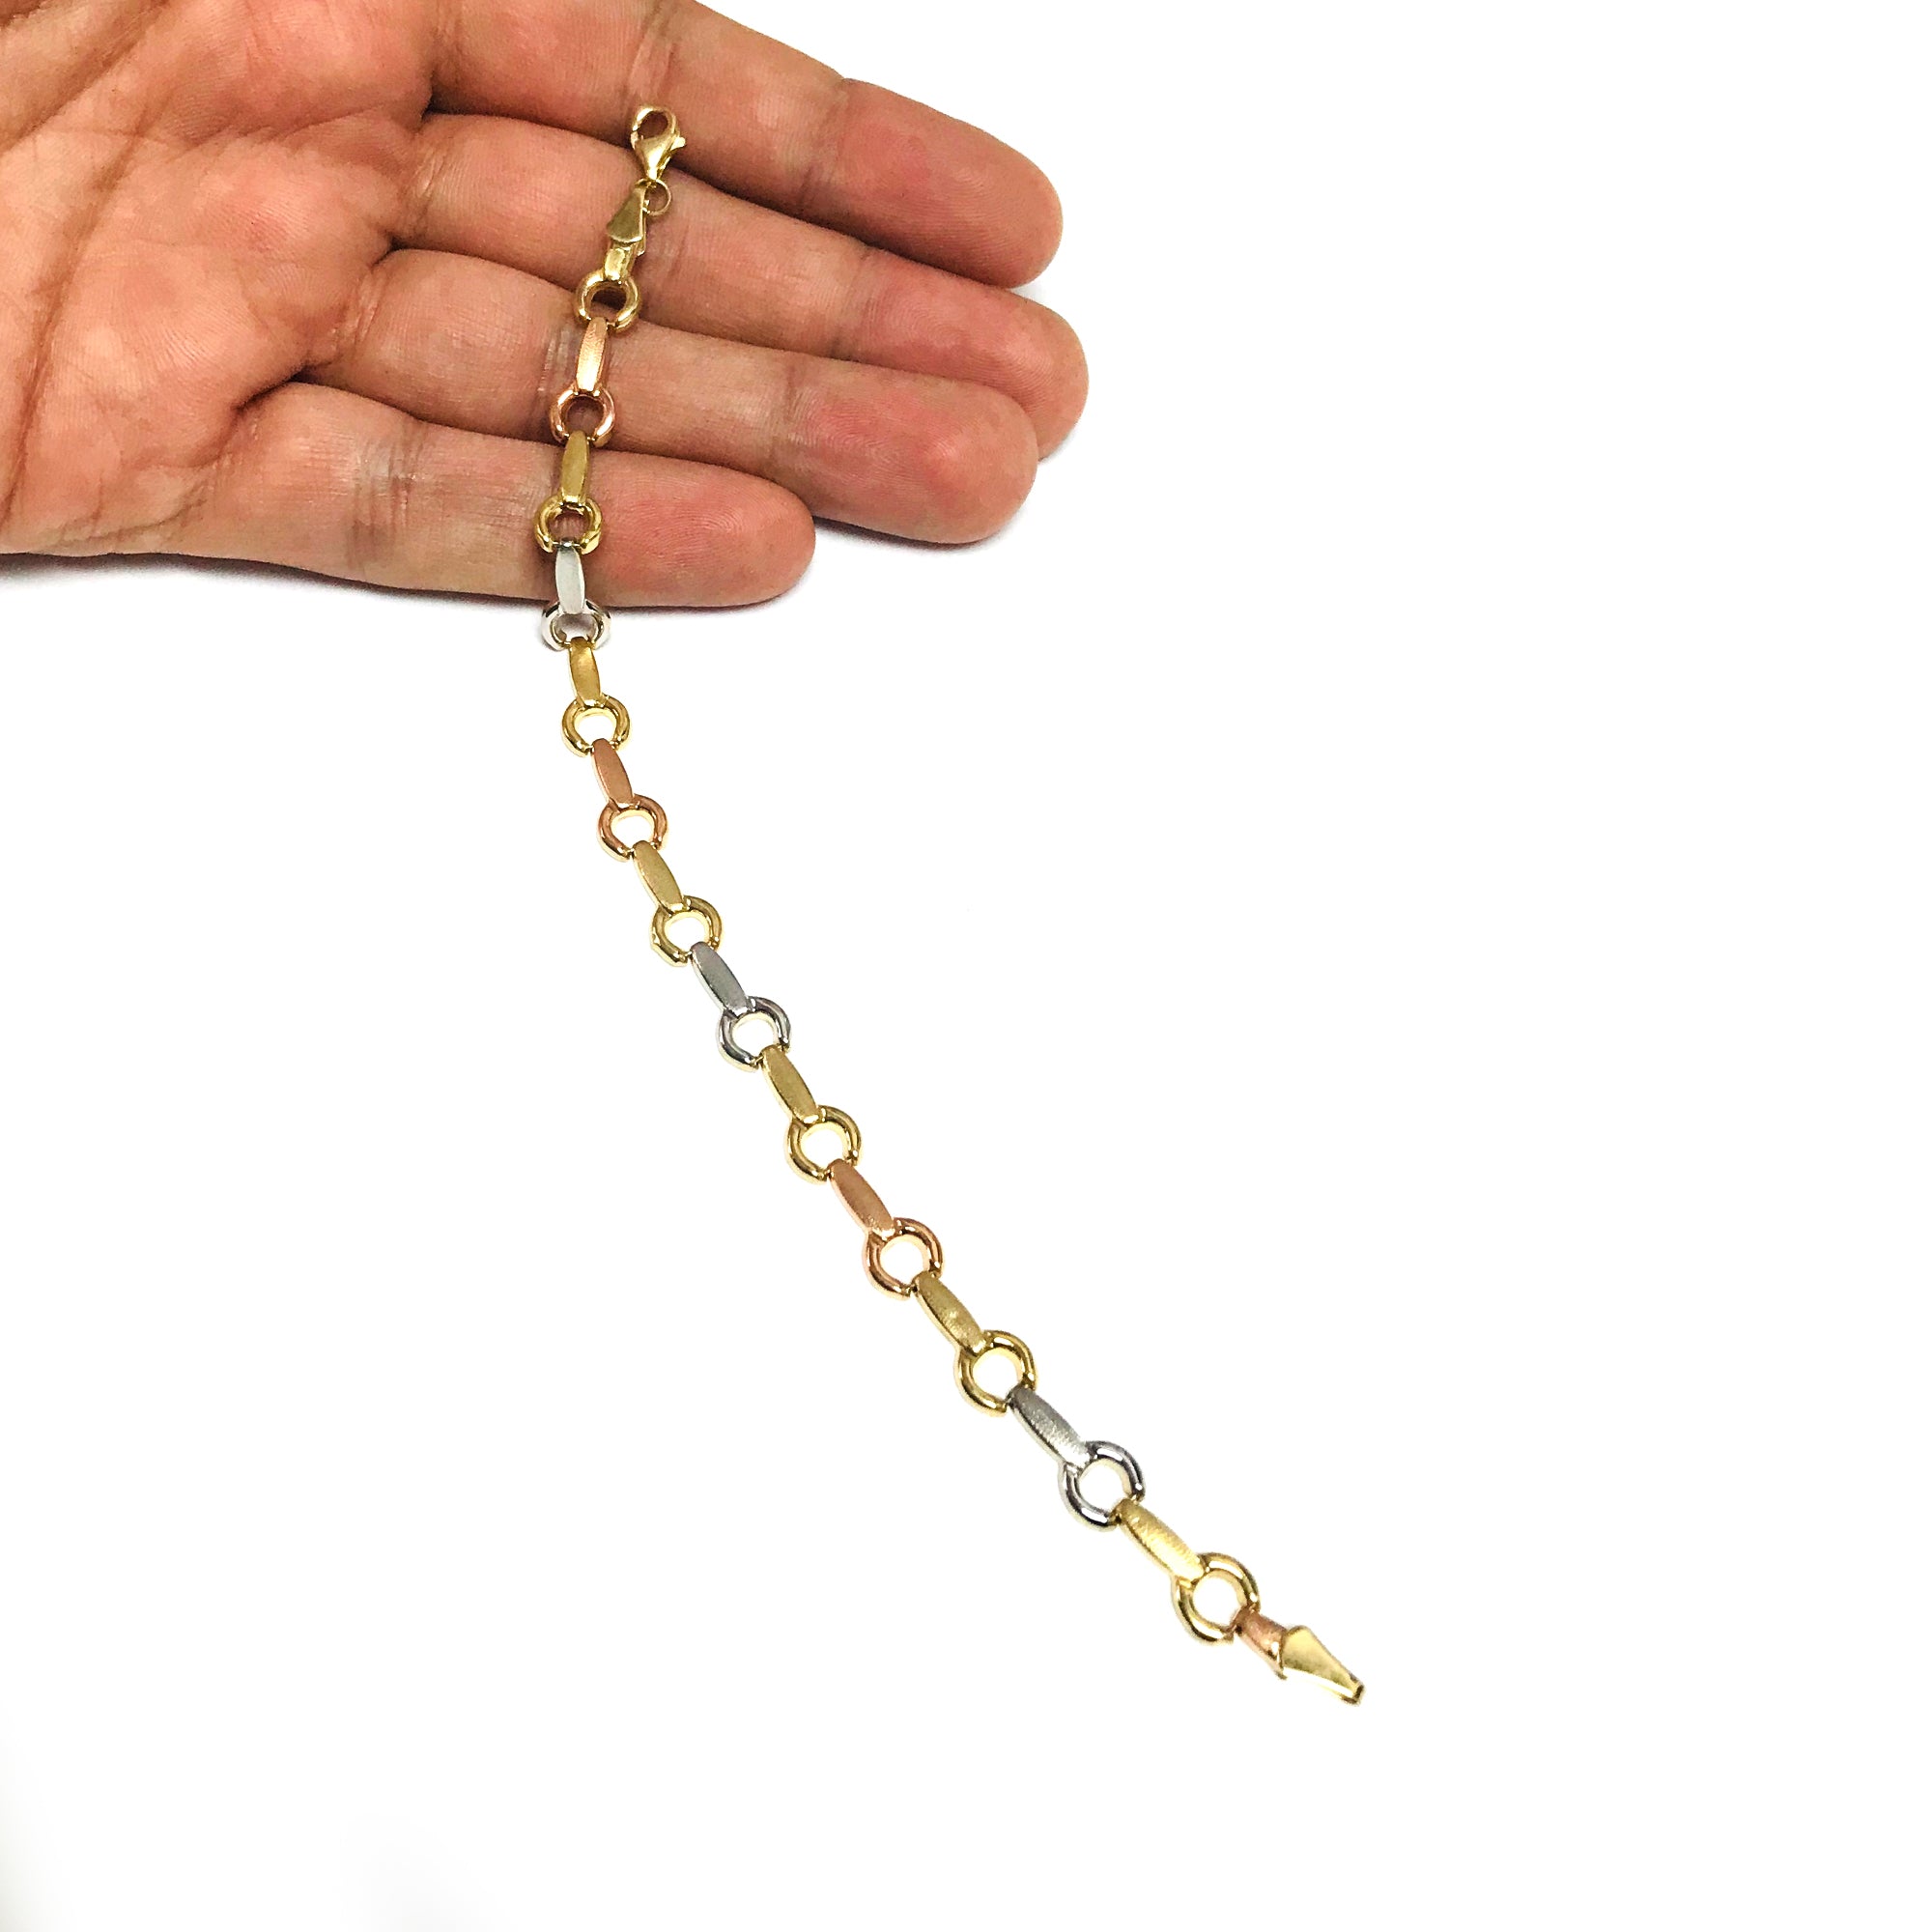 14k Yellow White And Rose Gold Links Fancy Bracelet, 7.25" fine designer jewelry for men and women